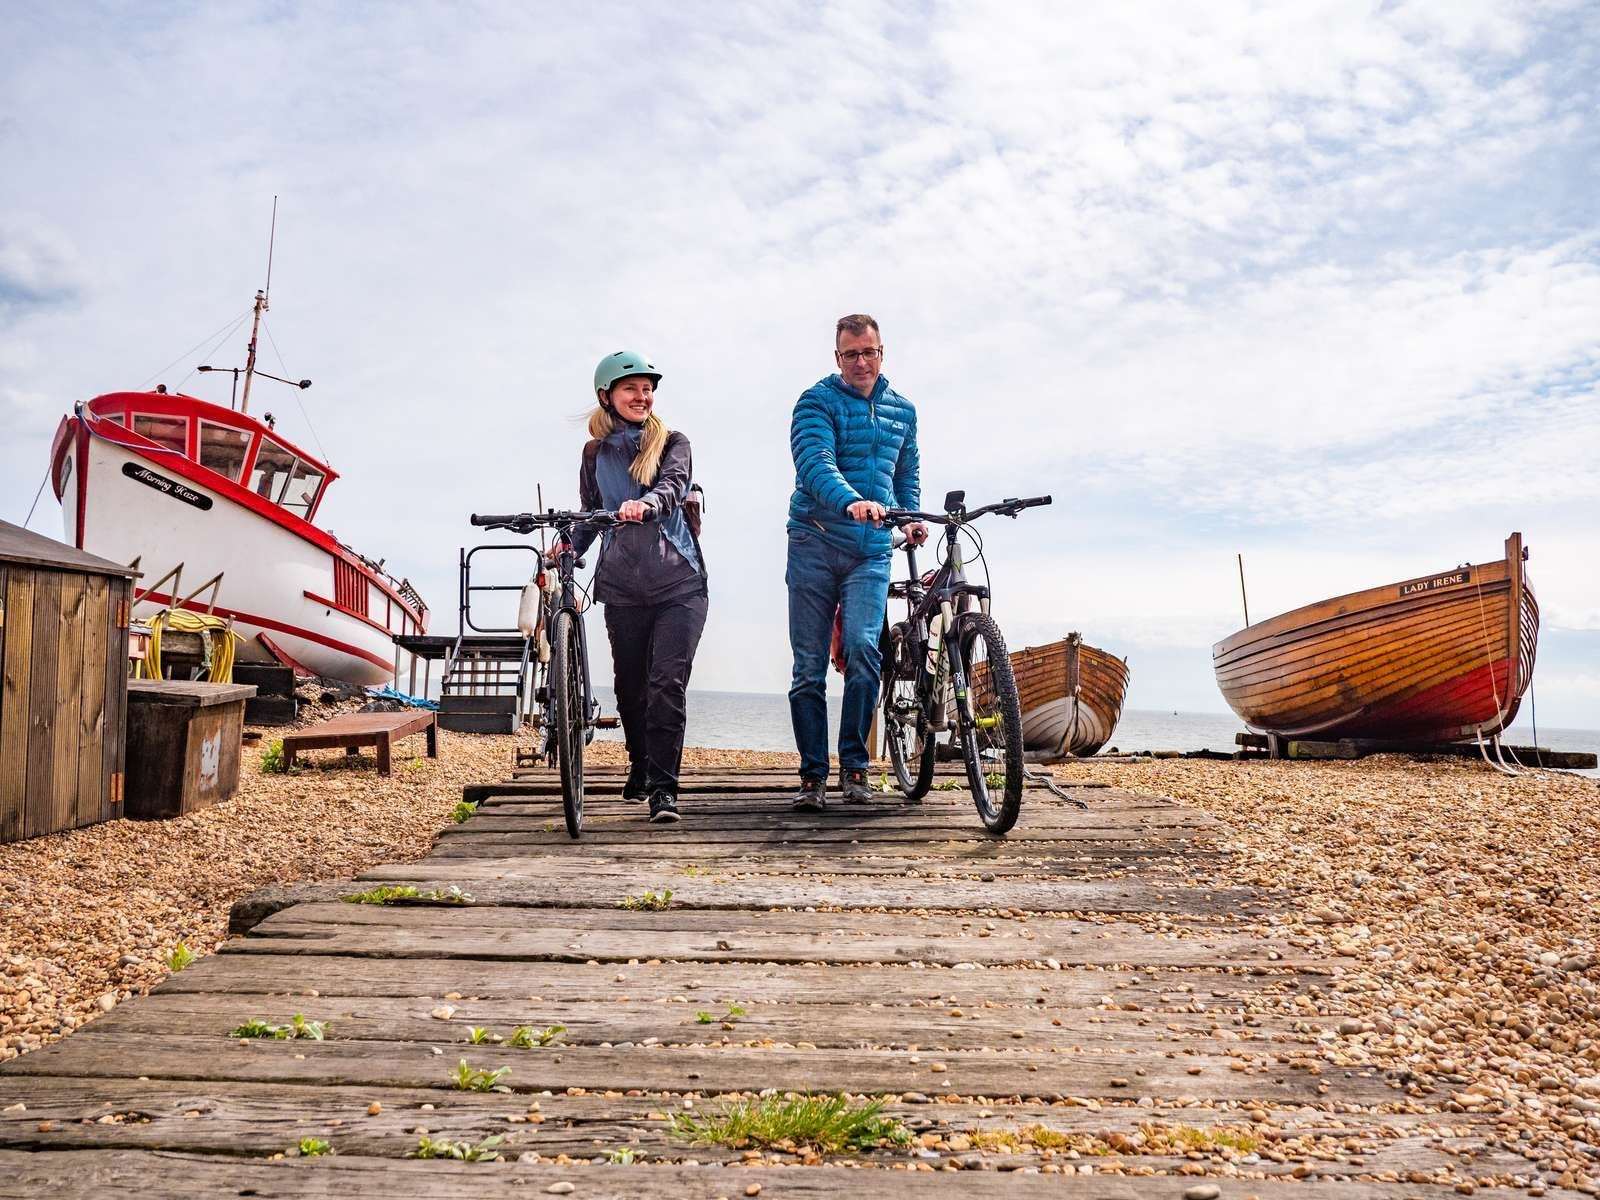 The route takes cyclists along the Kent coast